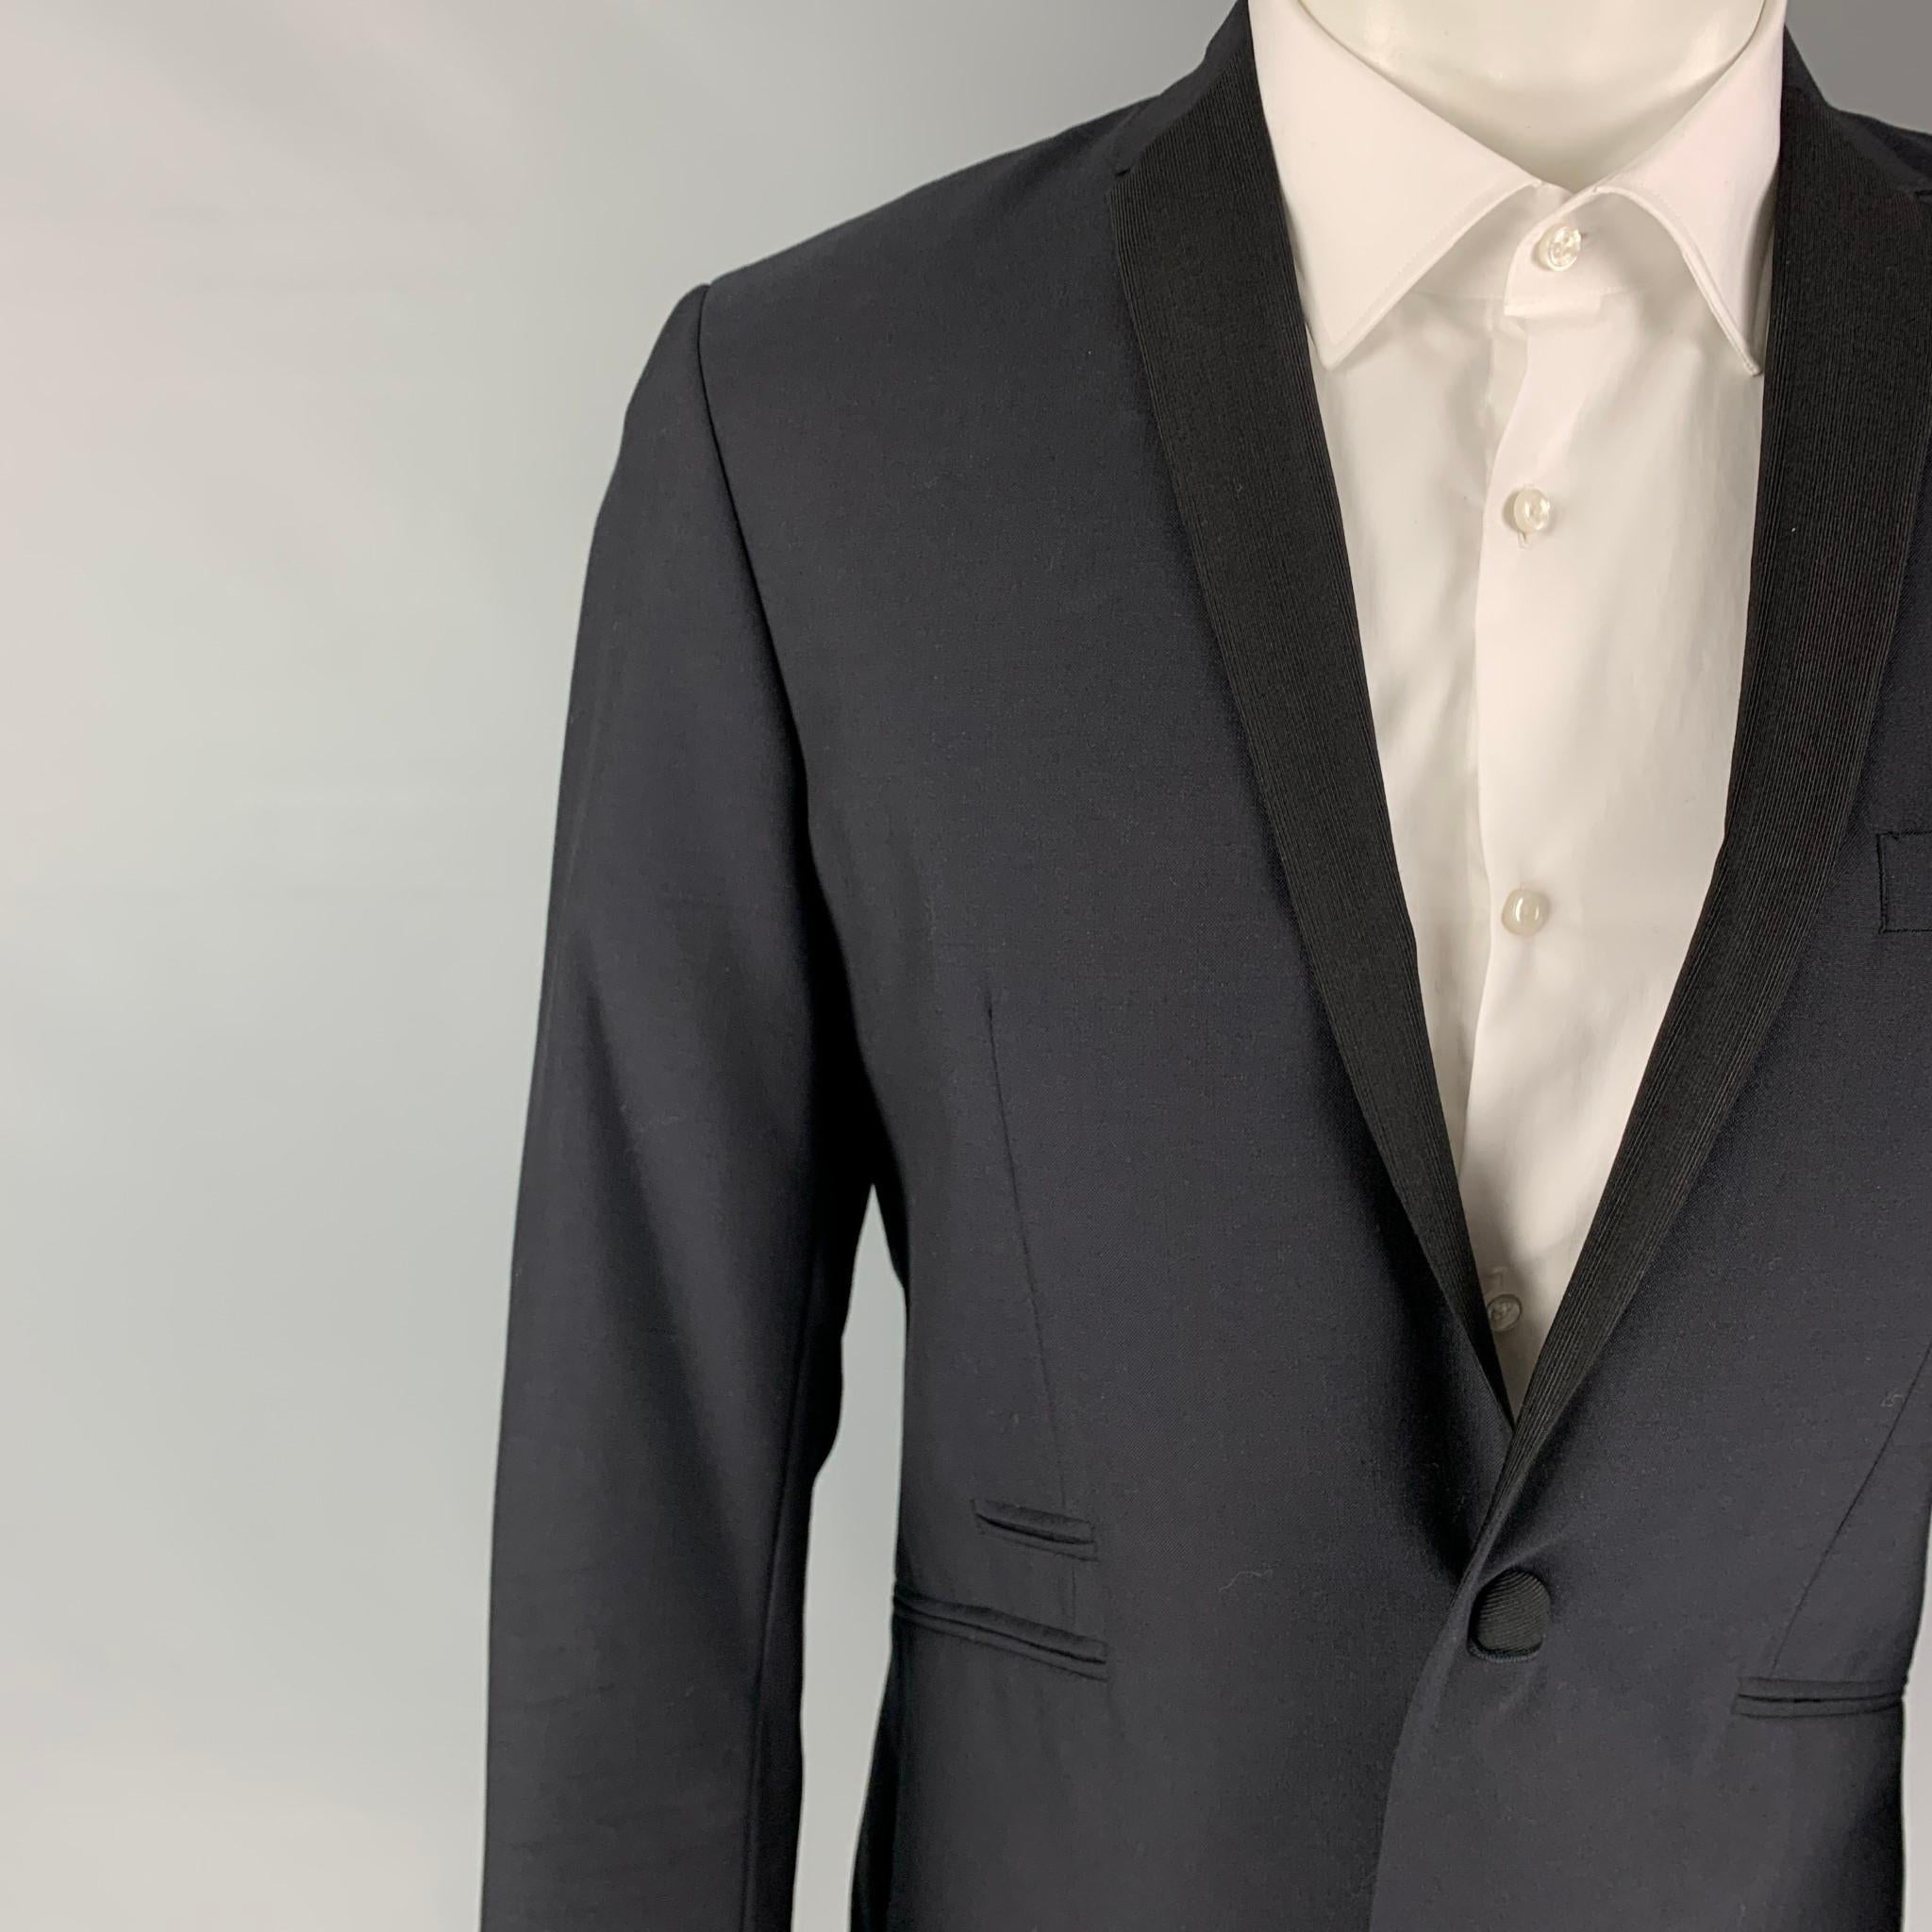 SPENCER HART sport coat comes in a navy wool / mohair with a full liner featuring a notch lapel, black trim, slit pockets, single back vent, and a single button closure. 

Excellent Pre-Owned Condition.
Marked: 38

Measurements:

Shoulder: 17.5